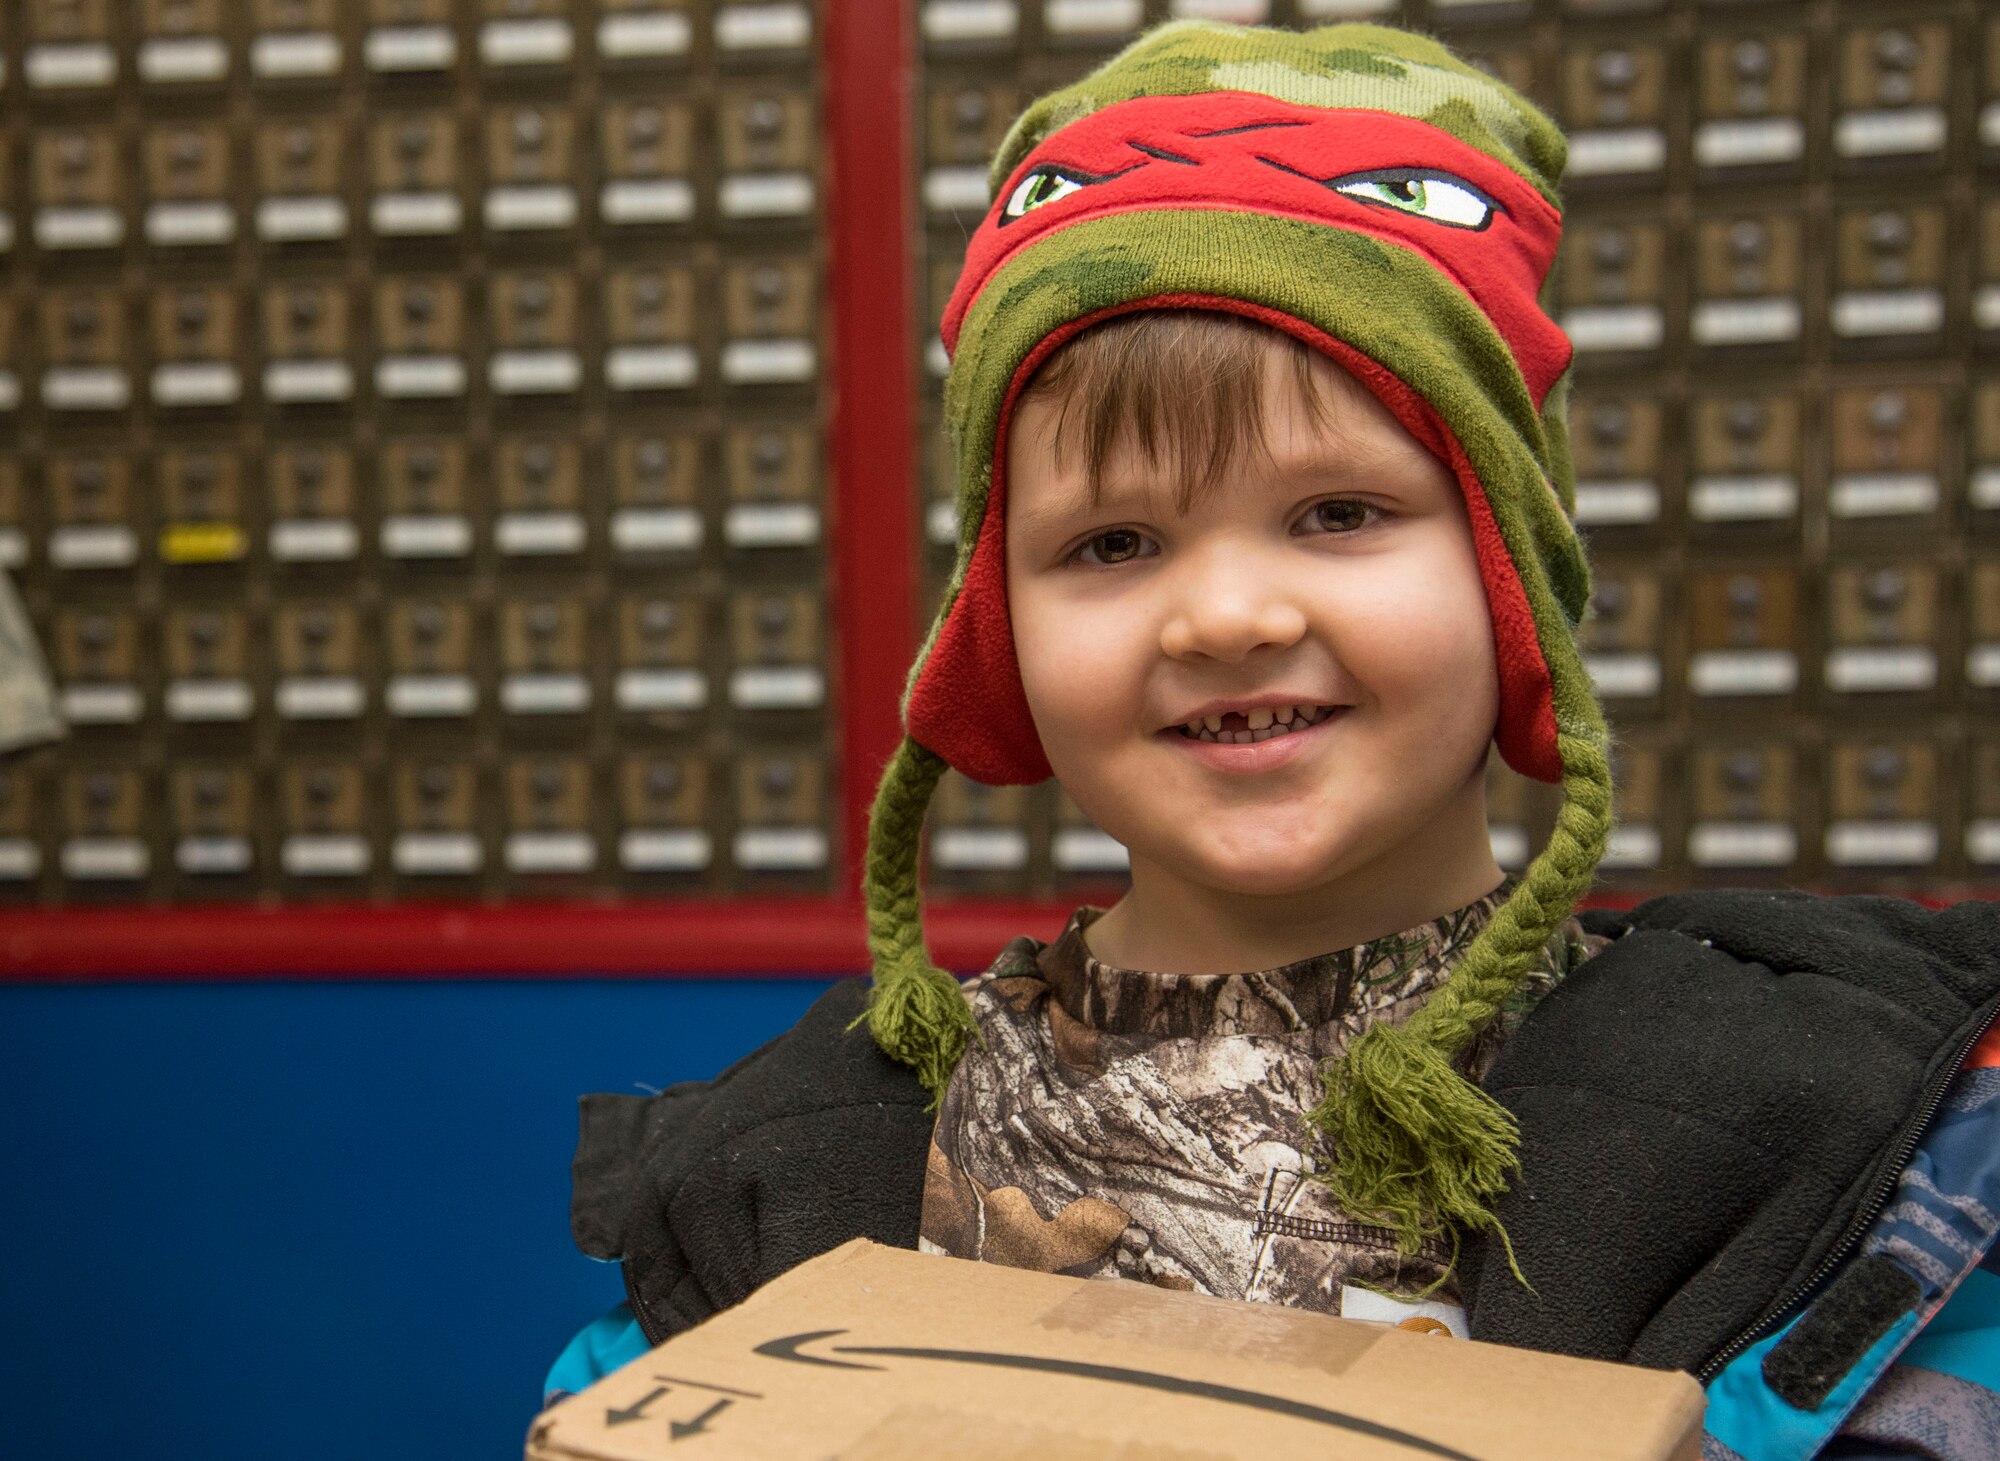 Conner Strickland, son of U.S. Air Force Staff Sgt. Jeremiah Strickland, a 35th Security Force Squadron defender, smiles as he holds his package at Misawa Air Base, Japan, Dec. 12, 2016. Once a package arrives, it is scanned into the post office inventory and a notification slip is printed and placed into the correct inbox. Personnel have 15 days to pick up their package or else it will be returned to the sender. (U.S. Air Force photo by Airman 1st Class Sadie Colbert)